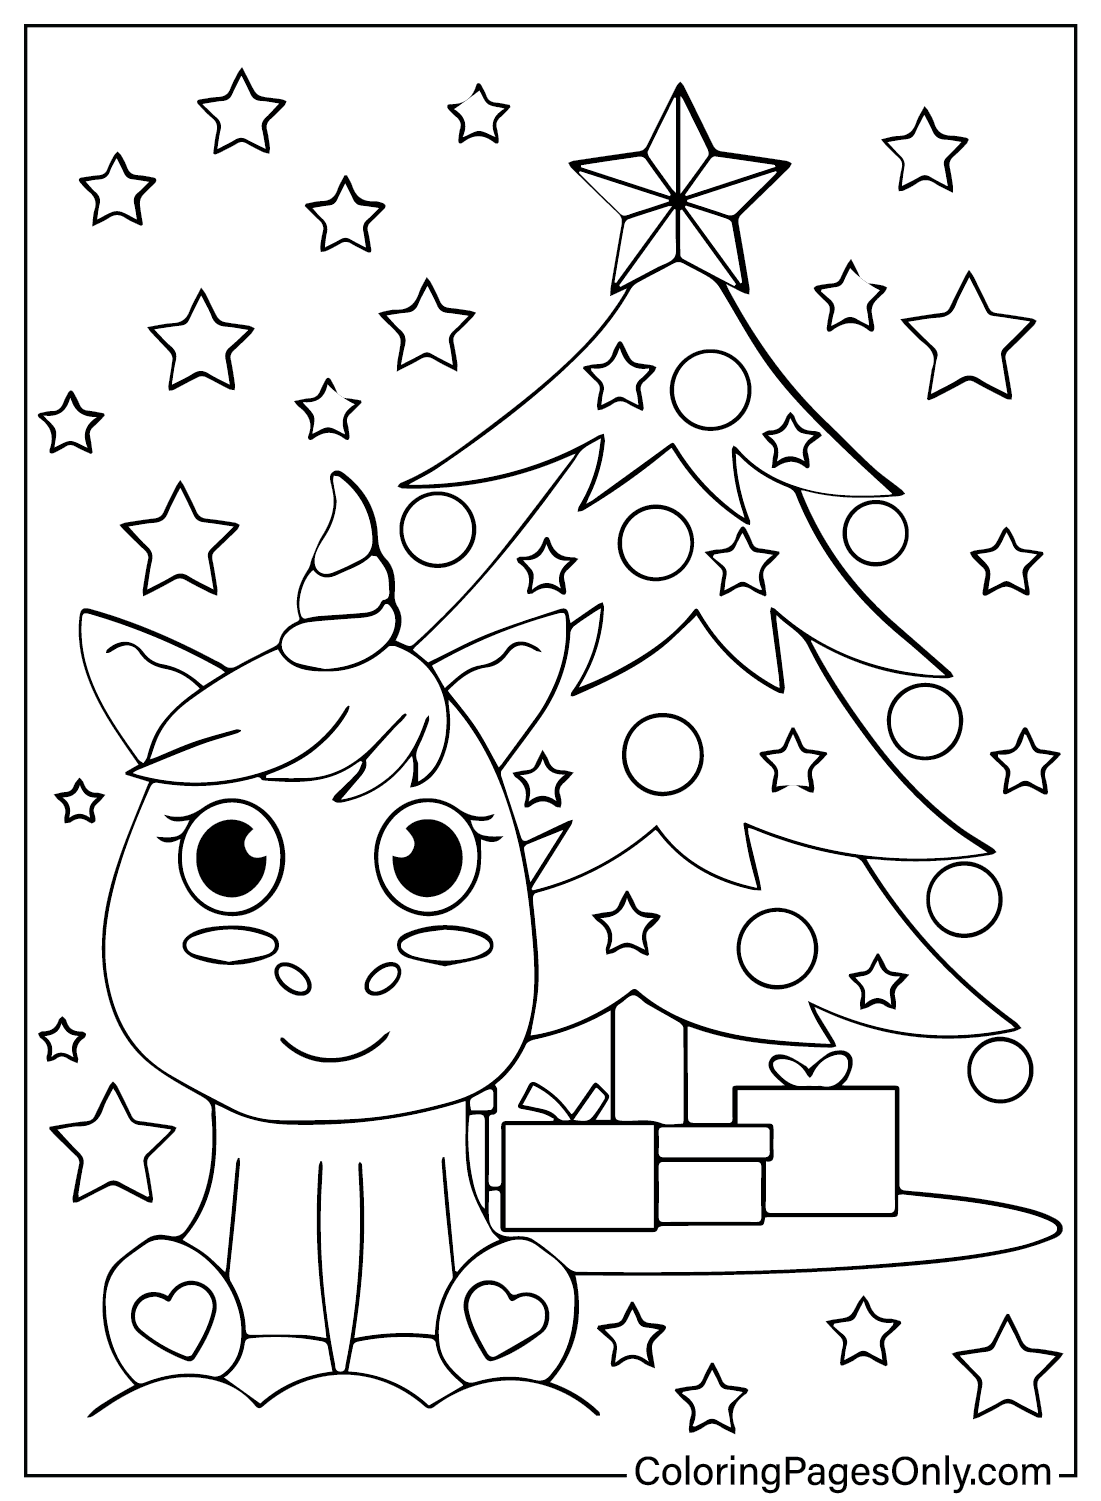 Christmas Tree Coloring Page PDF from Christmas Tree